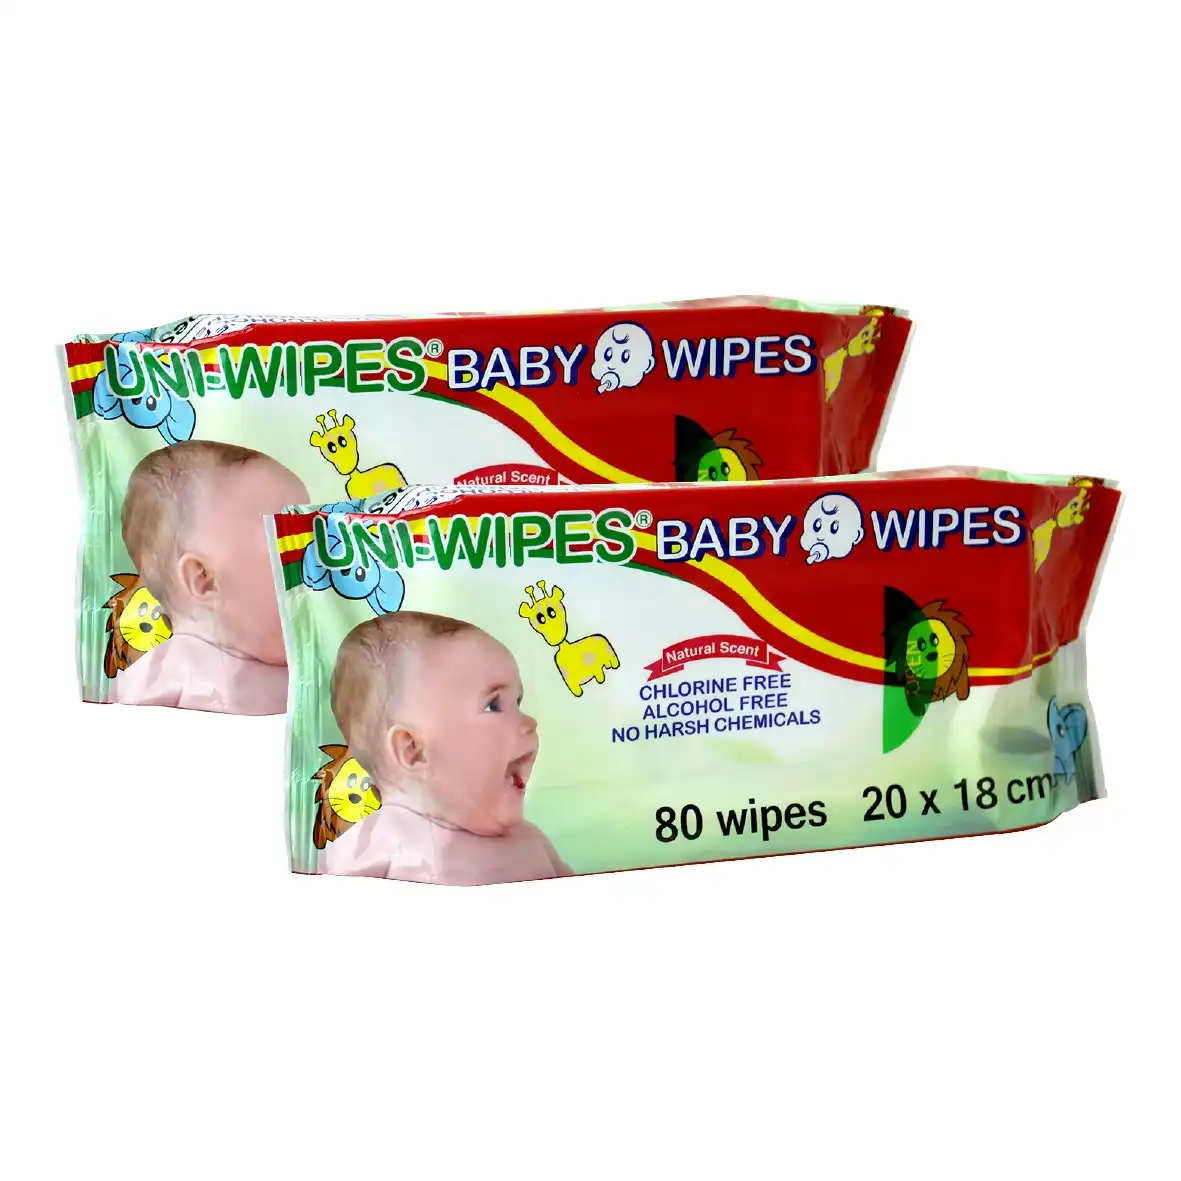 Uni-Wipe Baby Wipes, Natural Scent, Perfume-Free, 20 x 18cm, 80 Wipes in Resealable Soft Pack, 20 Packs/Carton